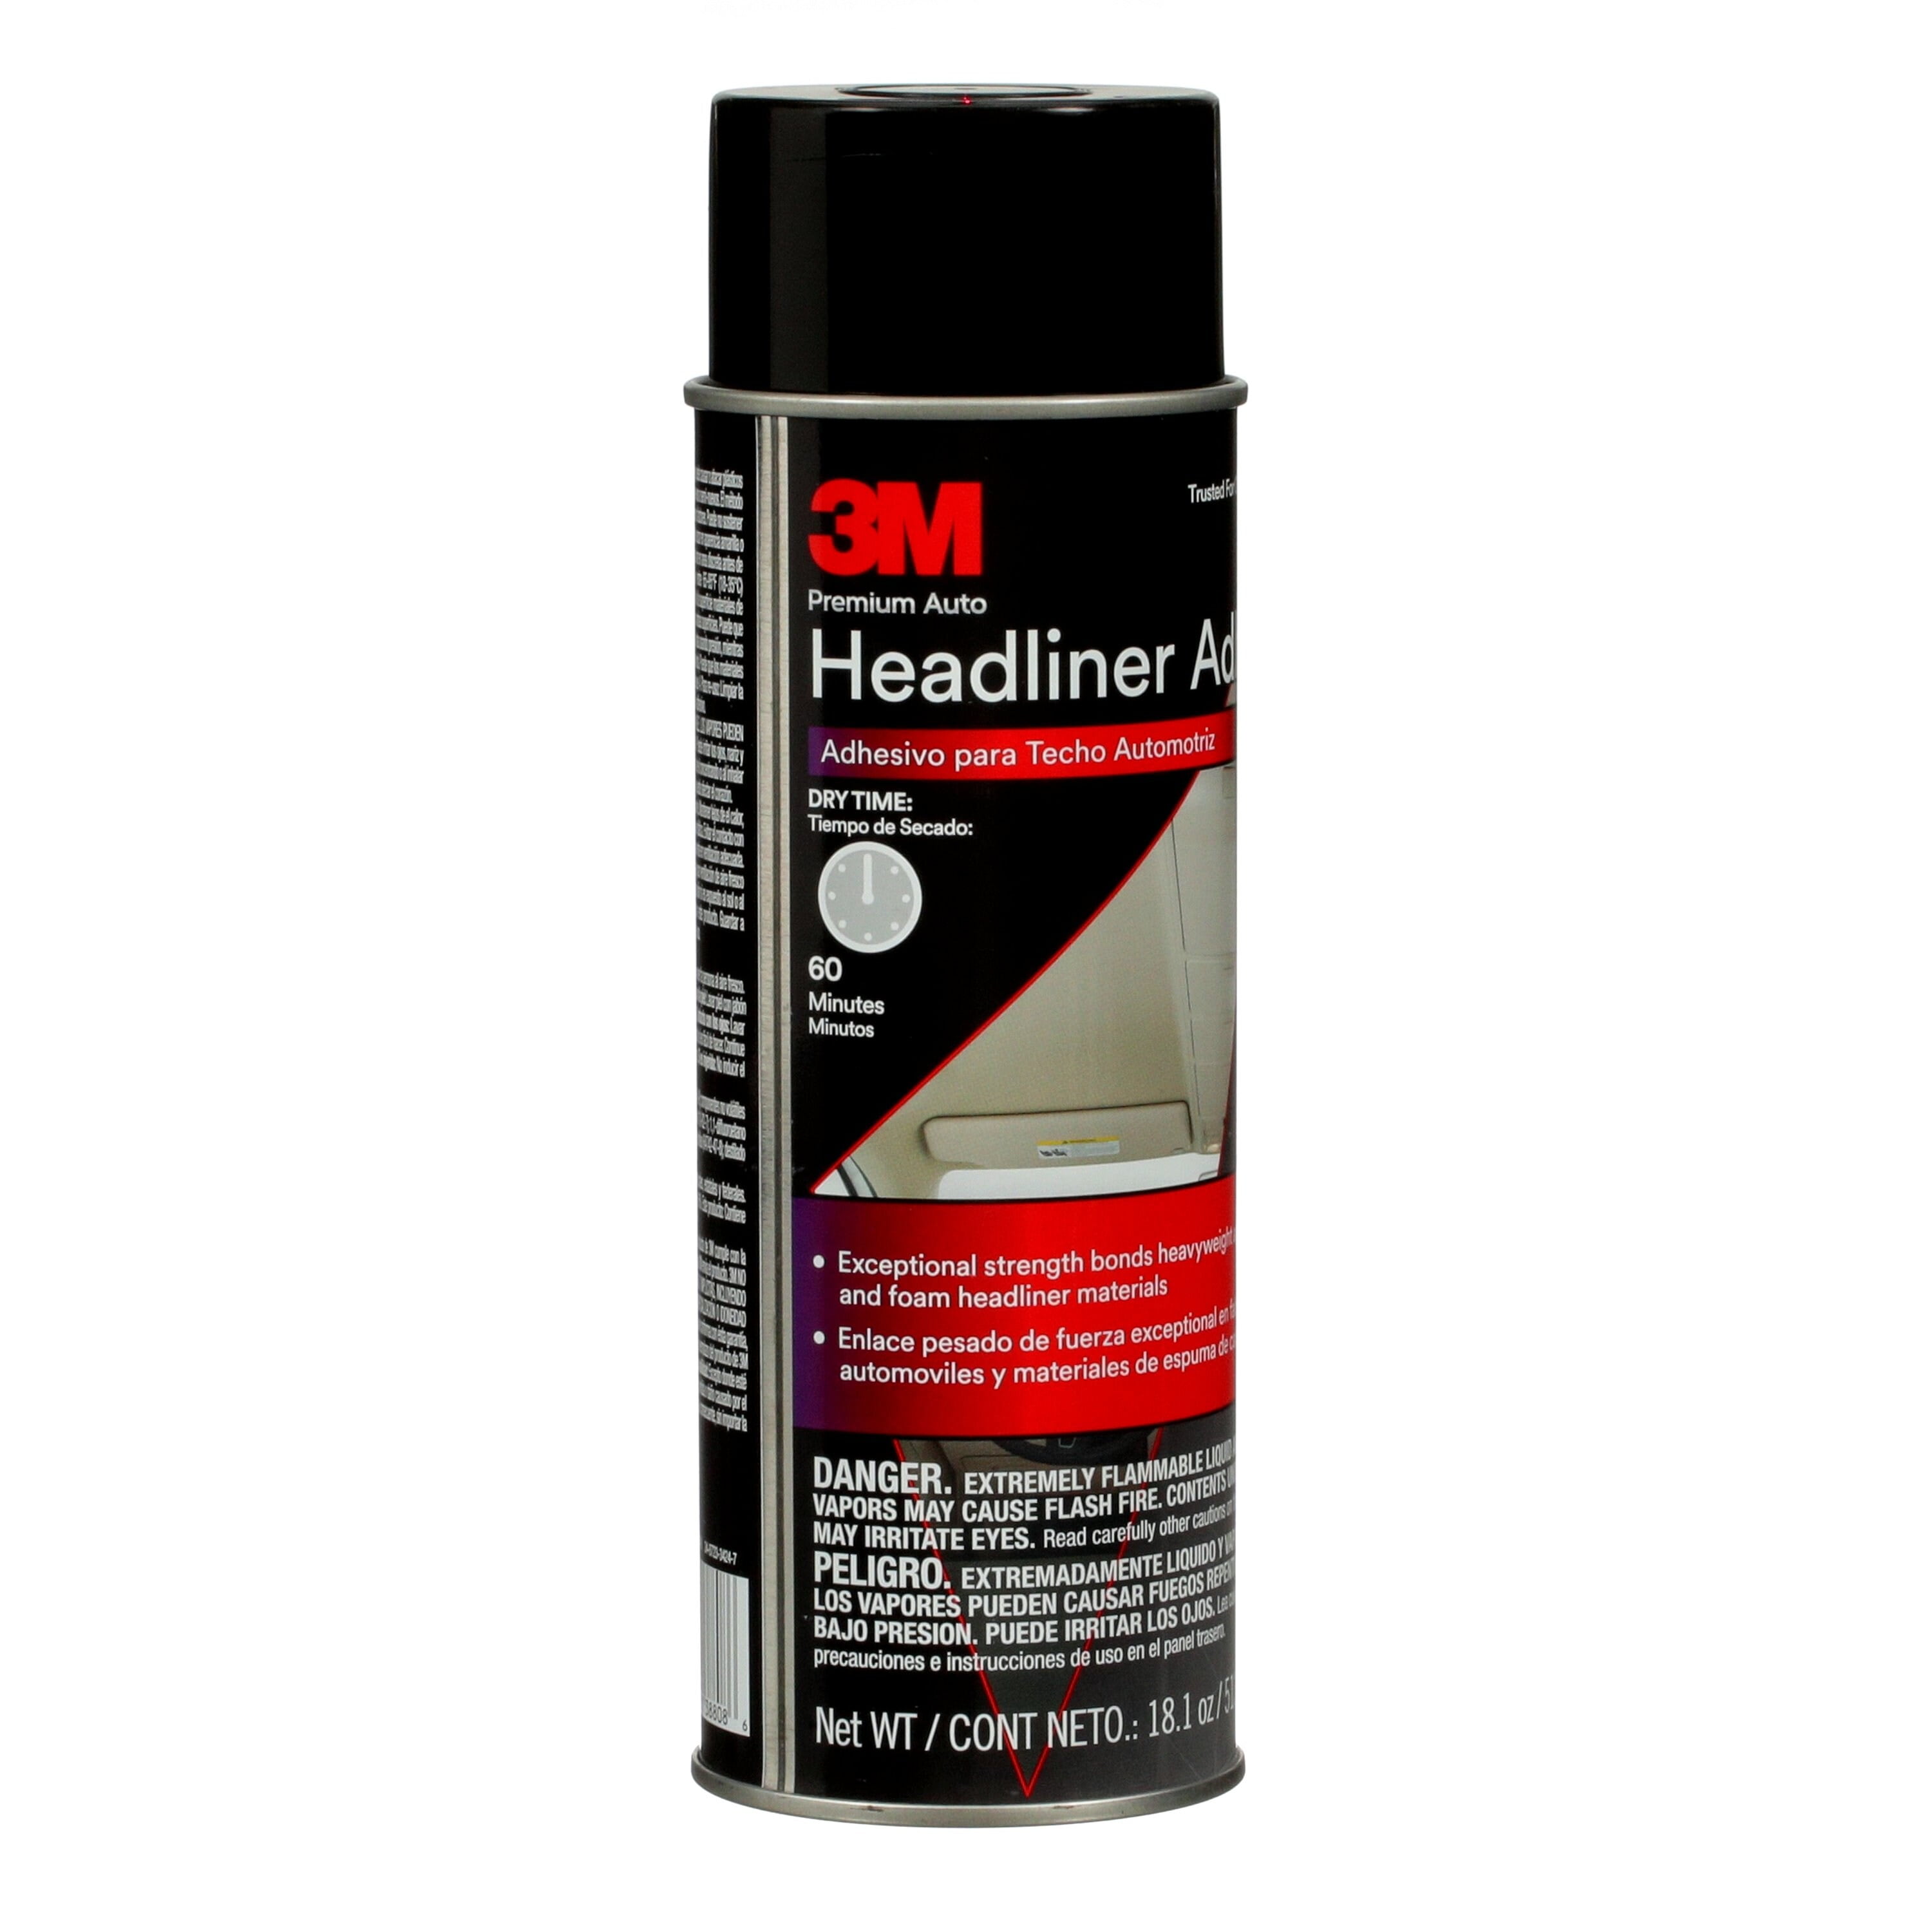 Best Headliner Adhesive Reviews & Recommendations